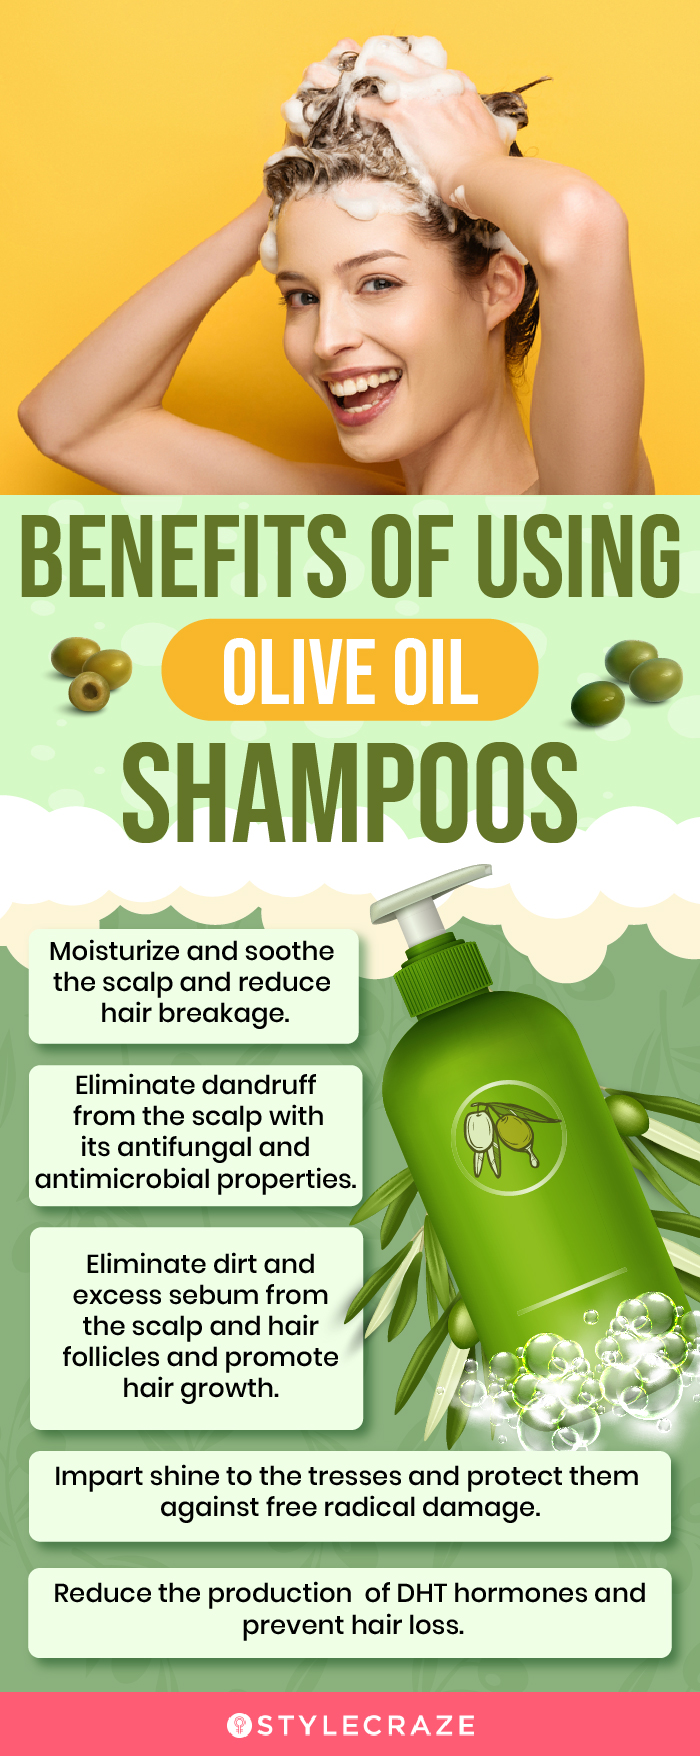 Benefits Of Using Olive Oil Shampoos (infographic)